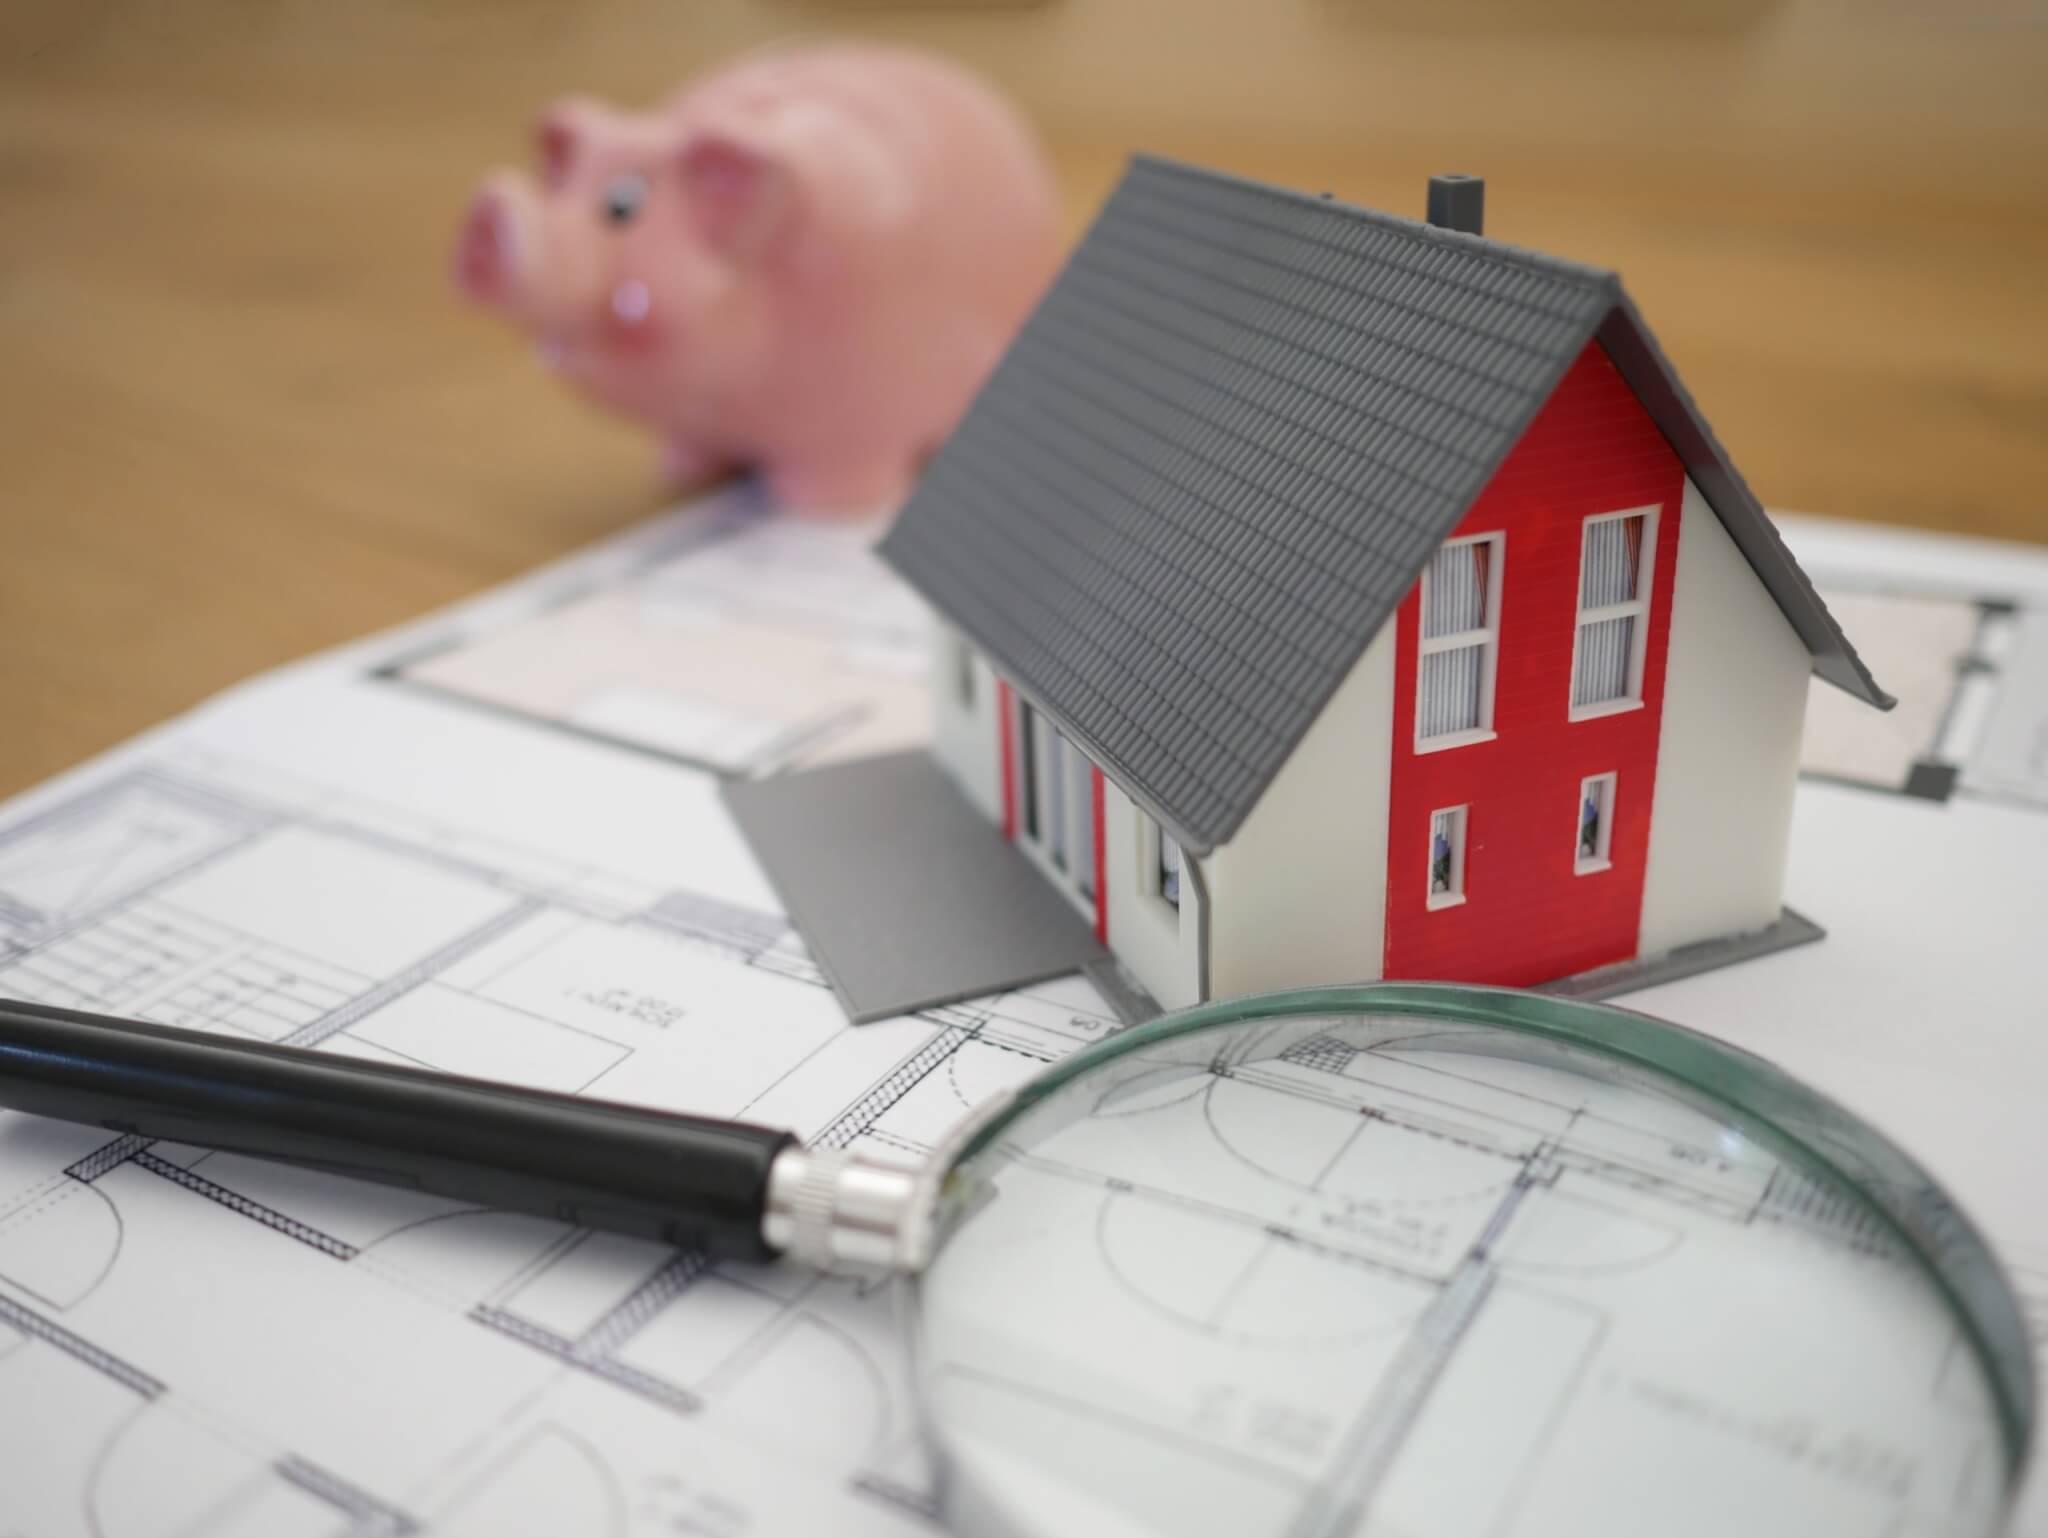 Model house next to magnifying glass and piggy bank on table